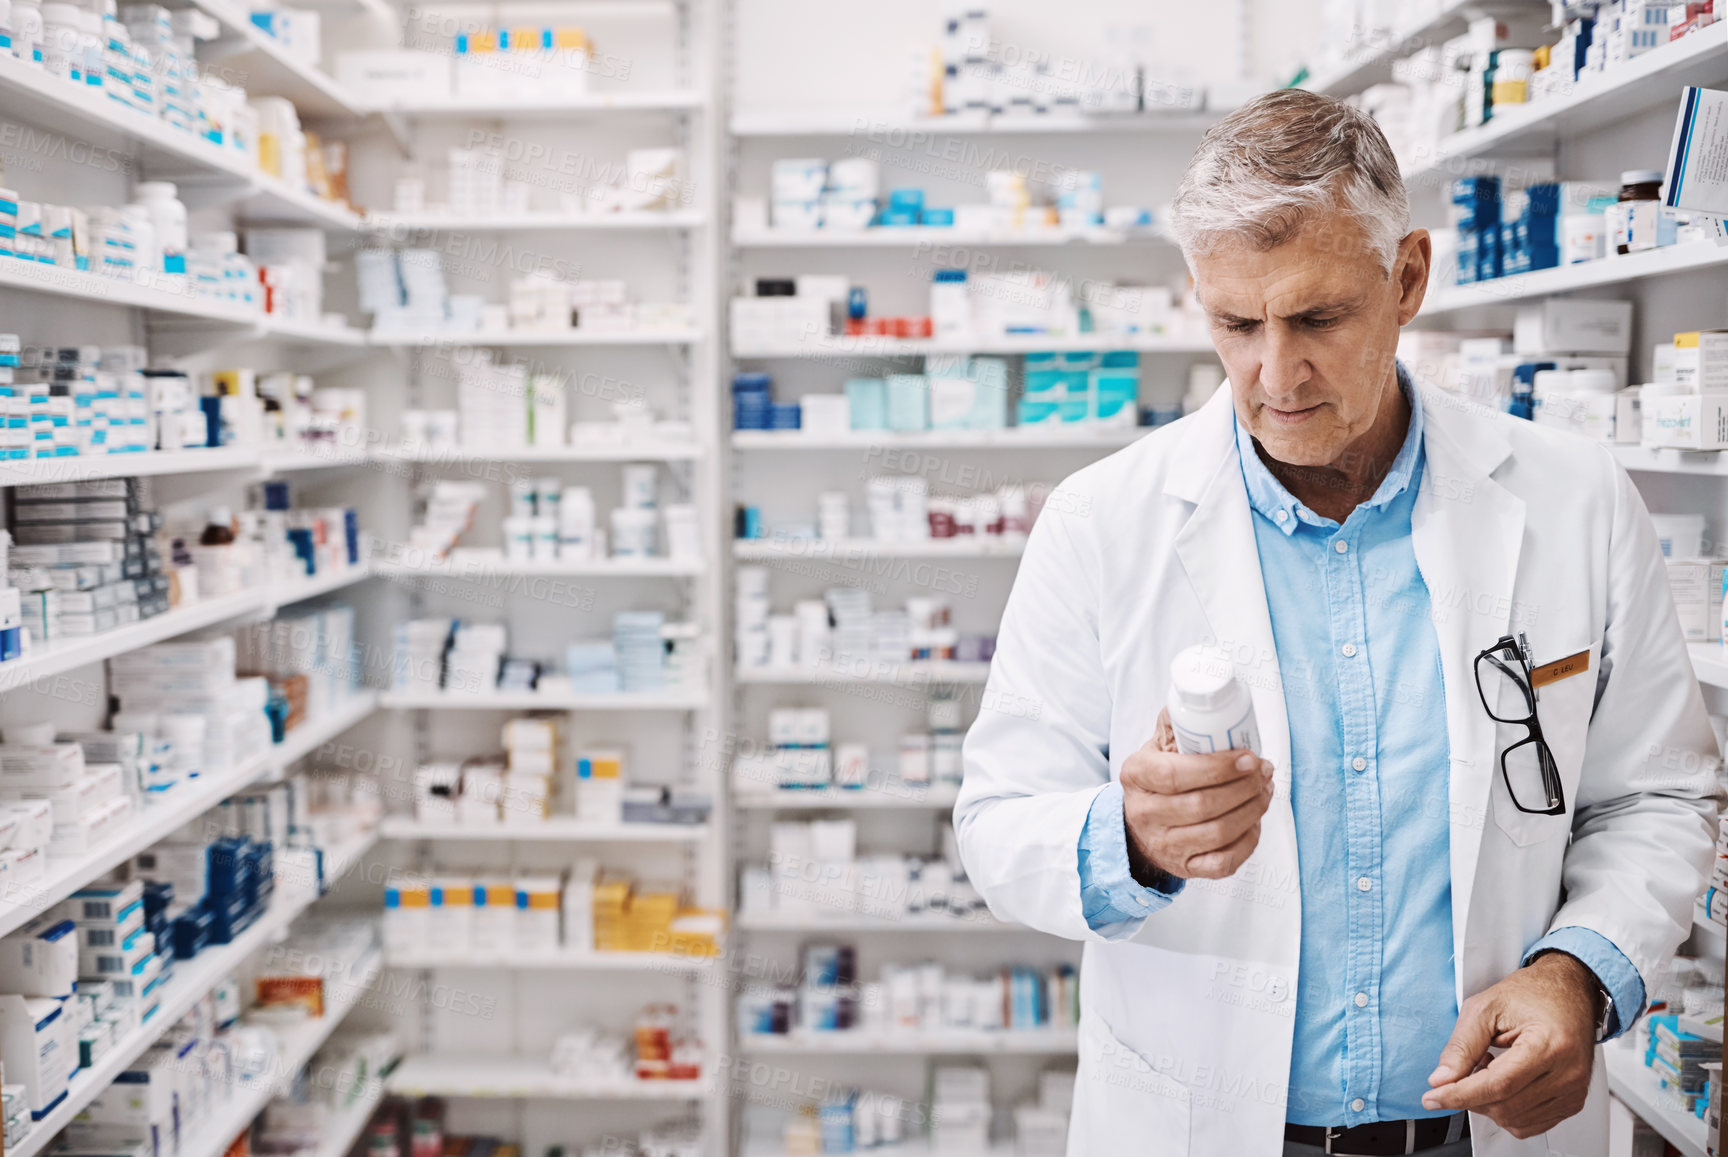 Buy stock photo Shot of a pharmacist reading the label on a product in a drugstore